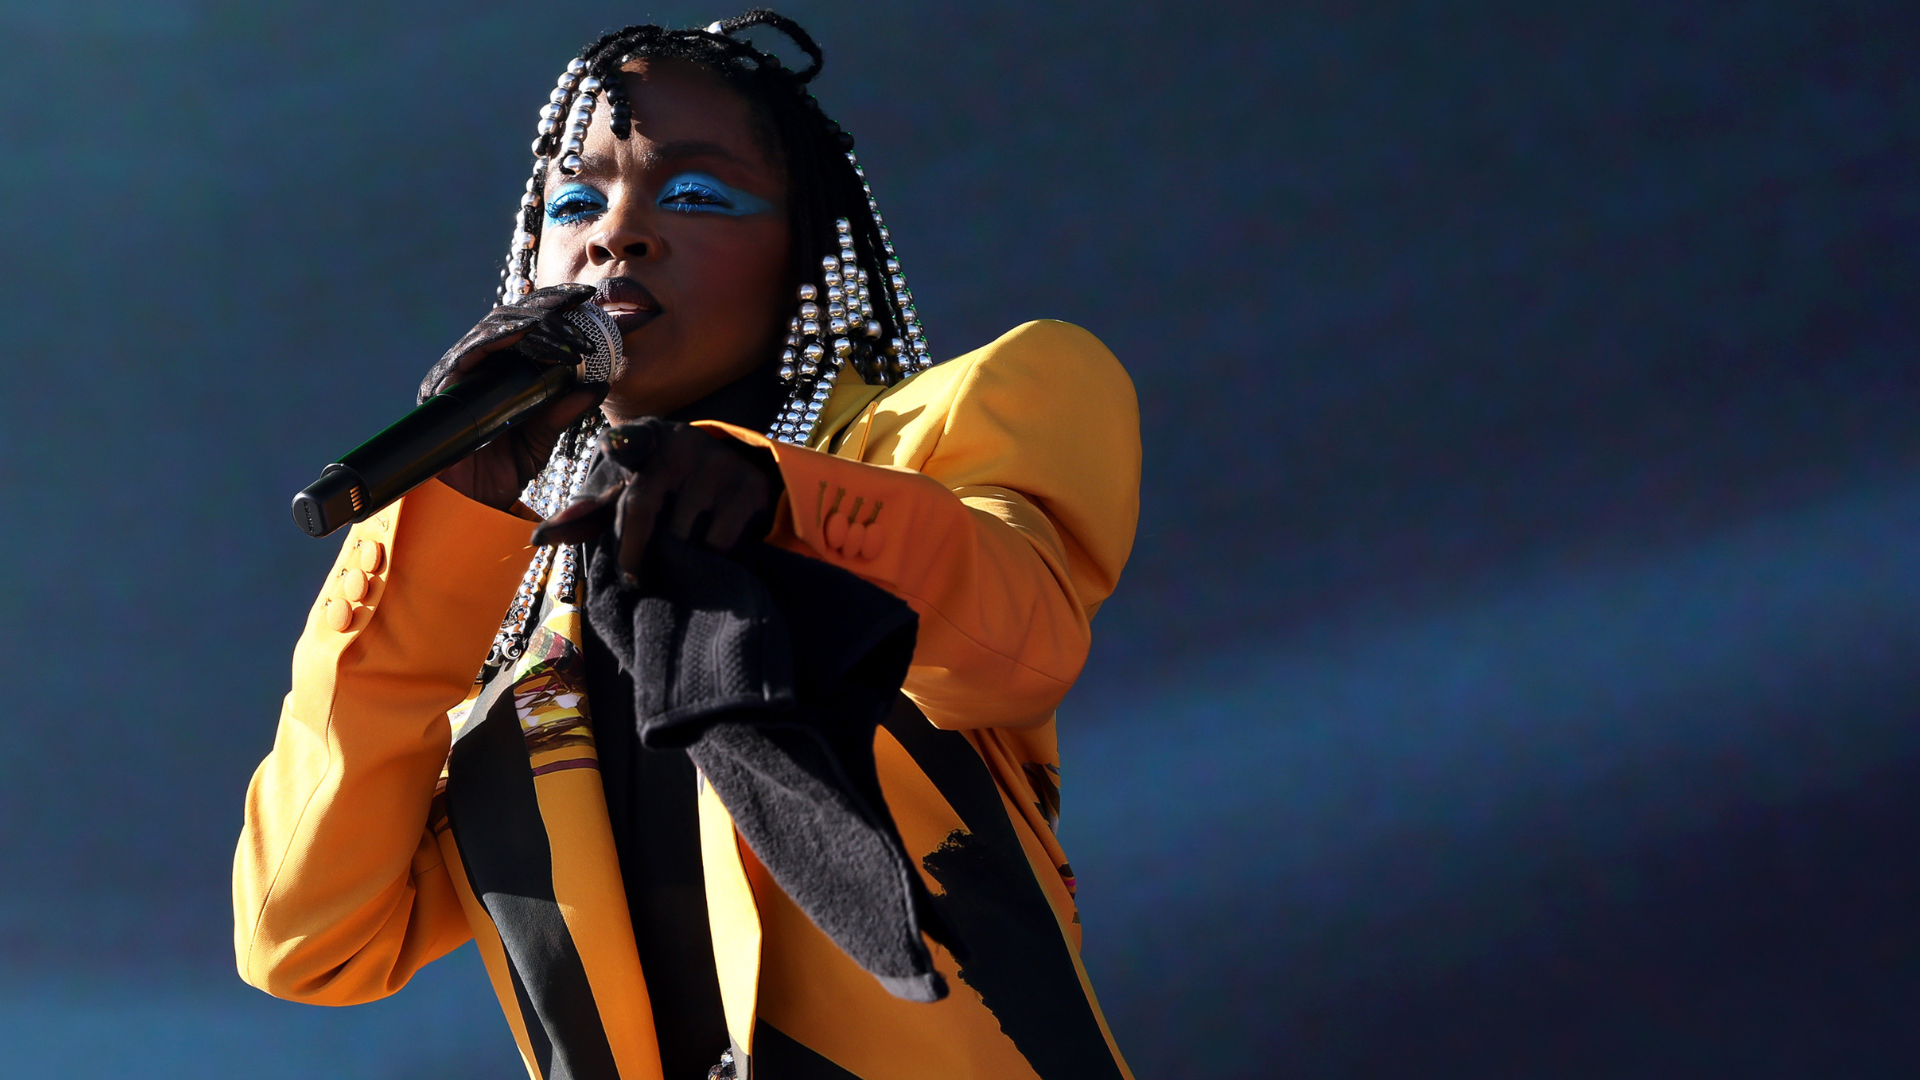 In Case You Missed It: Lauryn Hill Wears Balmain To Coachella, Louis Vuitton Launches Exhibition, And More